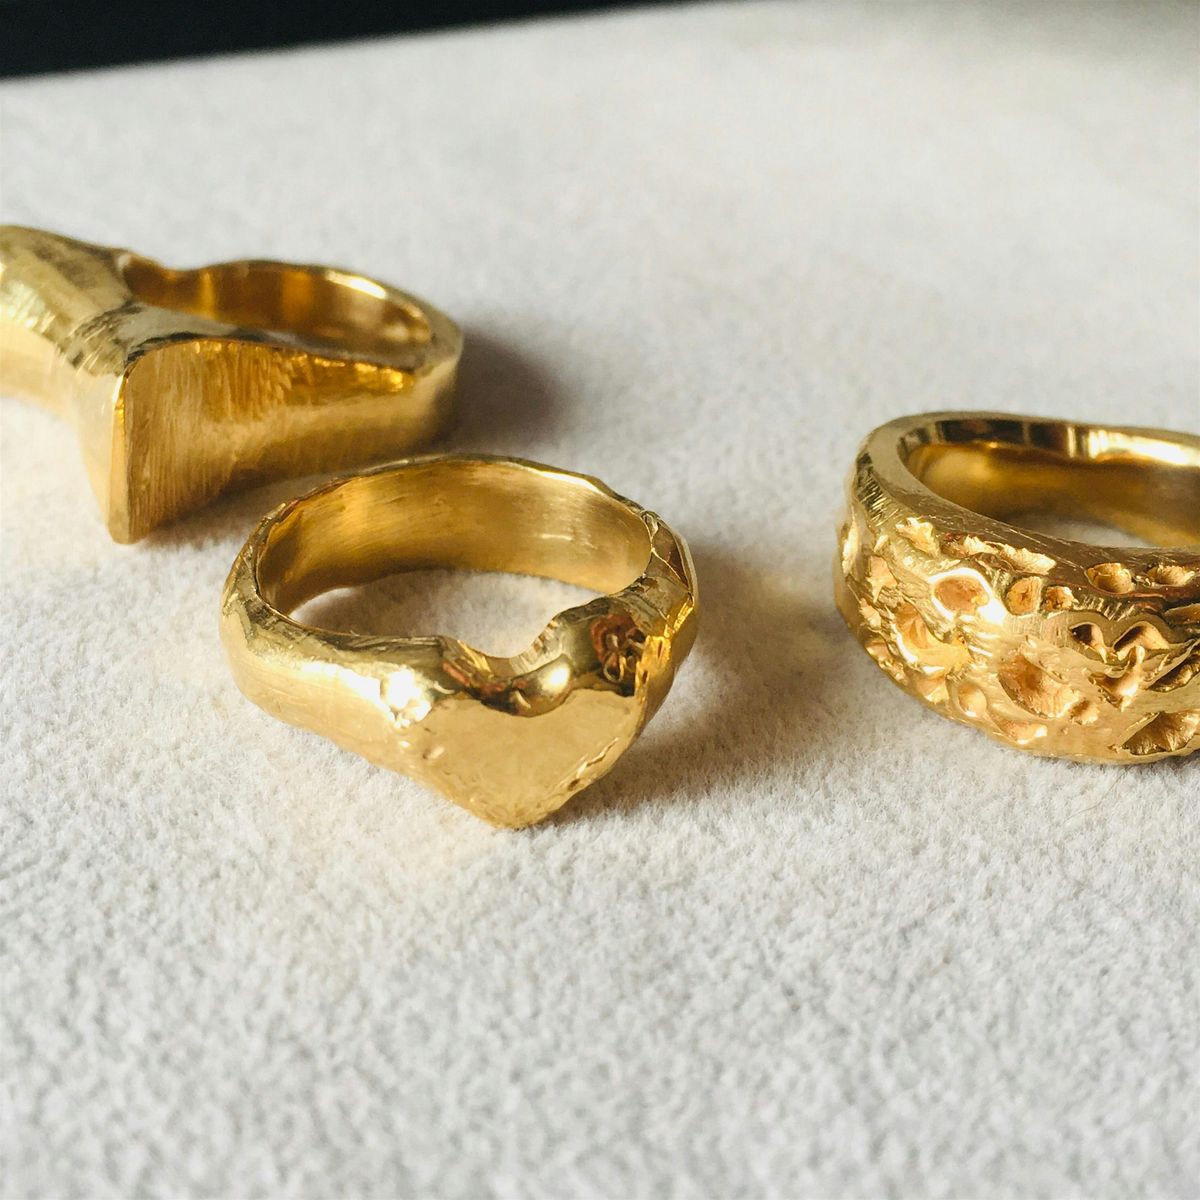 Wax Ring Workshop | Sunday 23rd June @ 11am